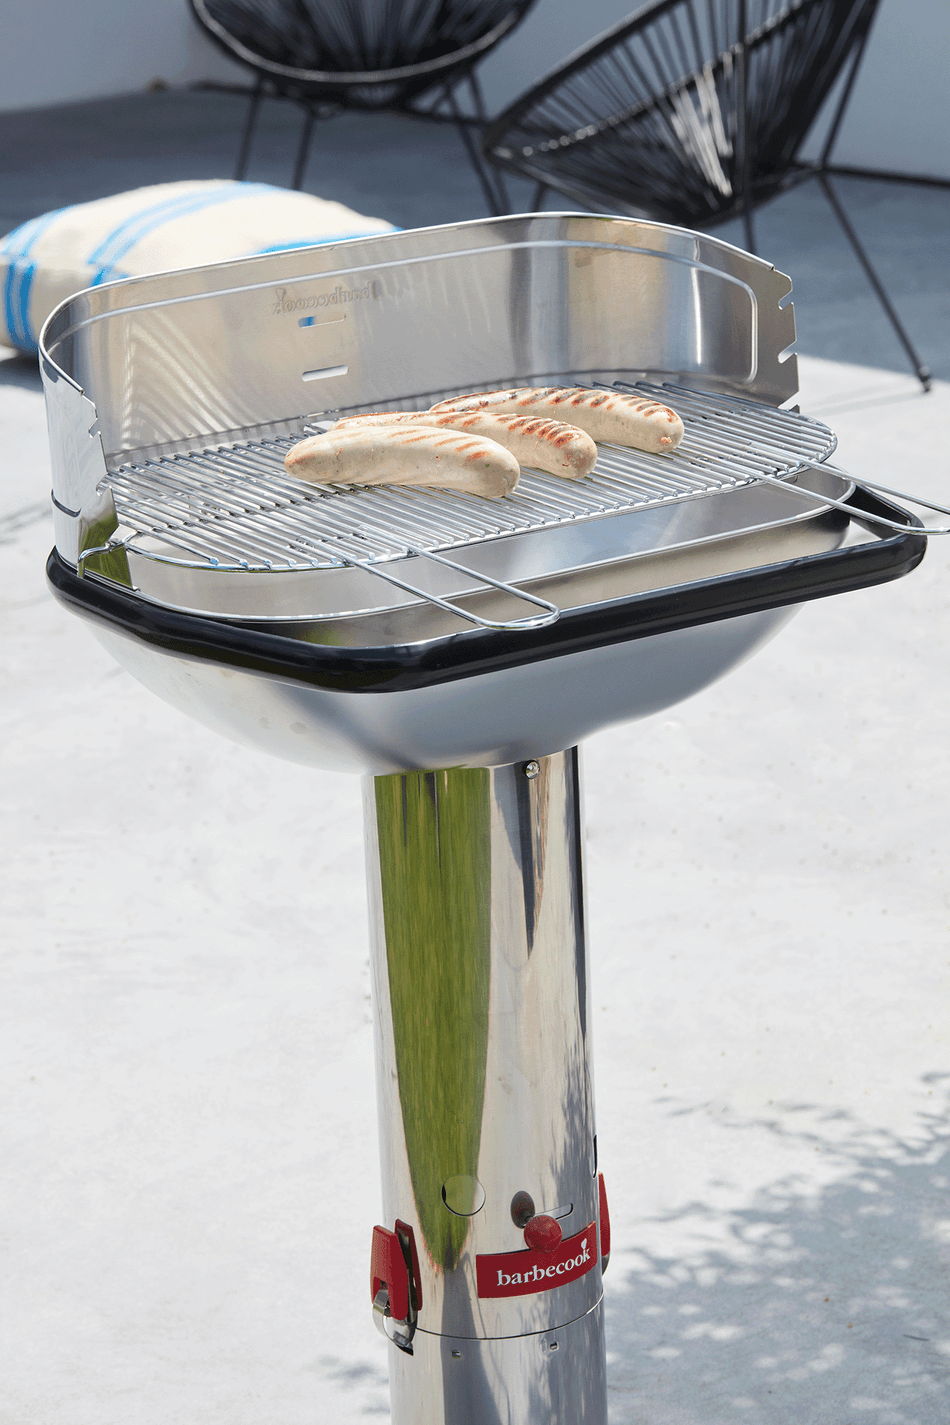 Loewy 55 SST – Barbecook